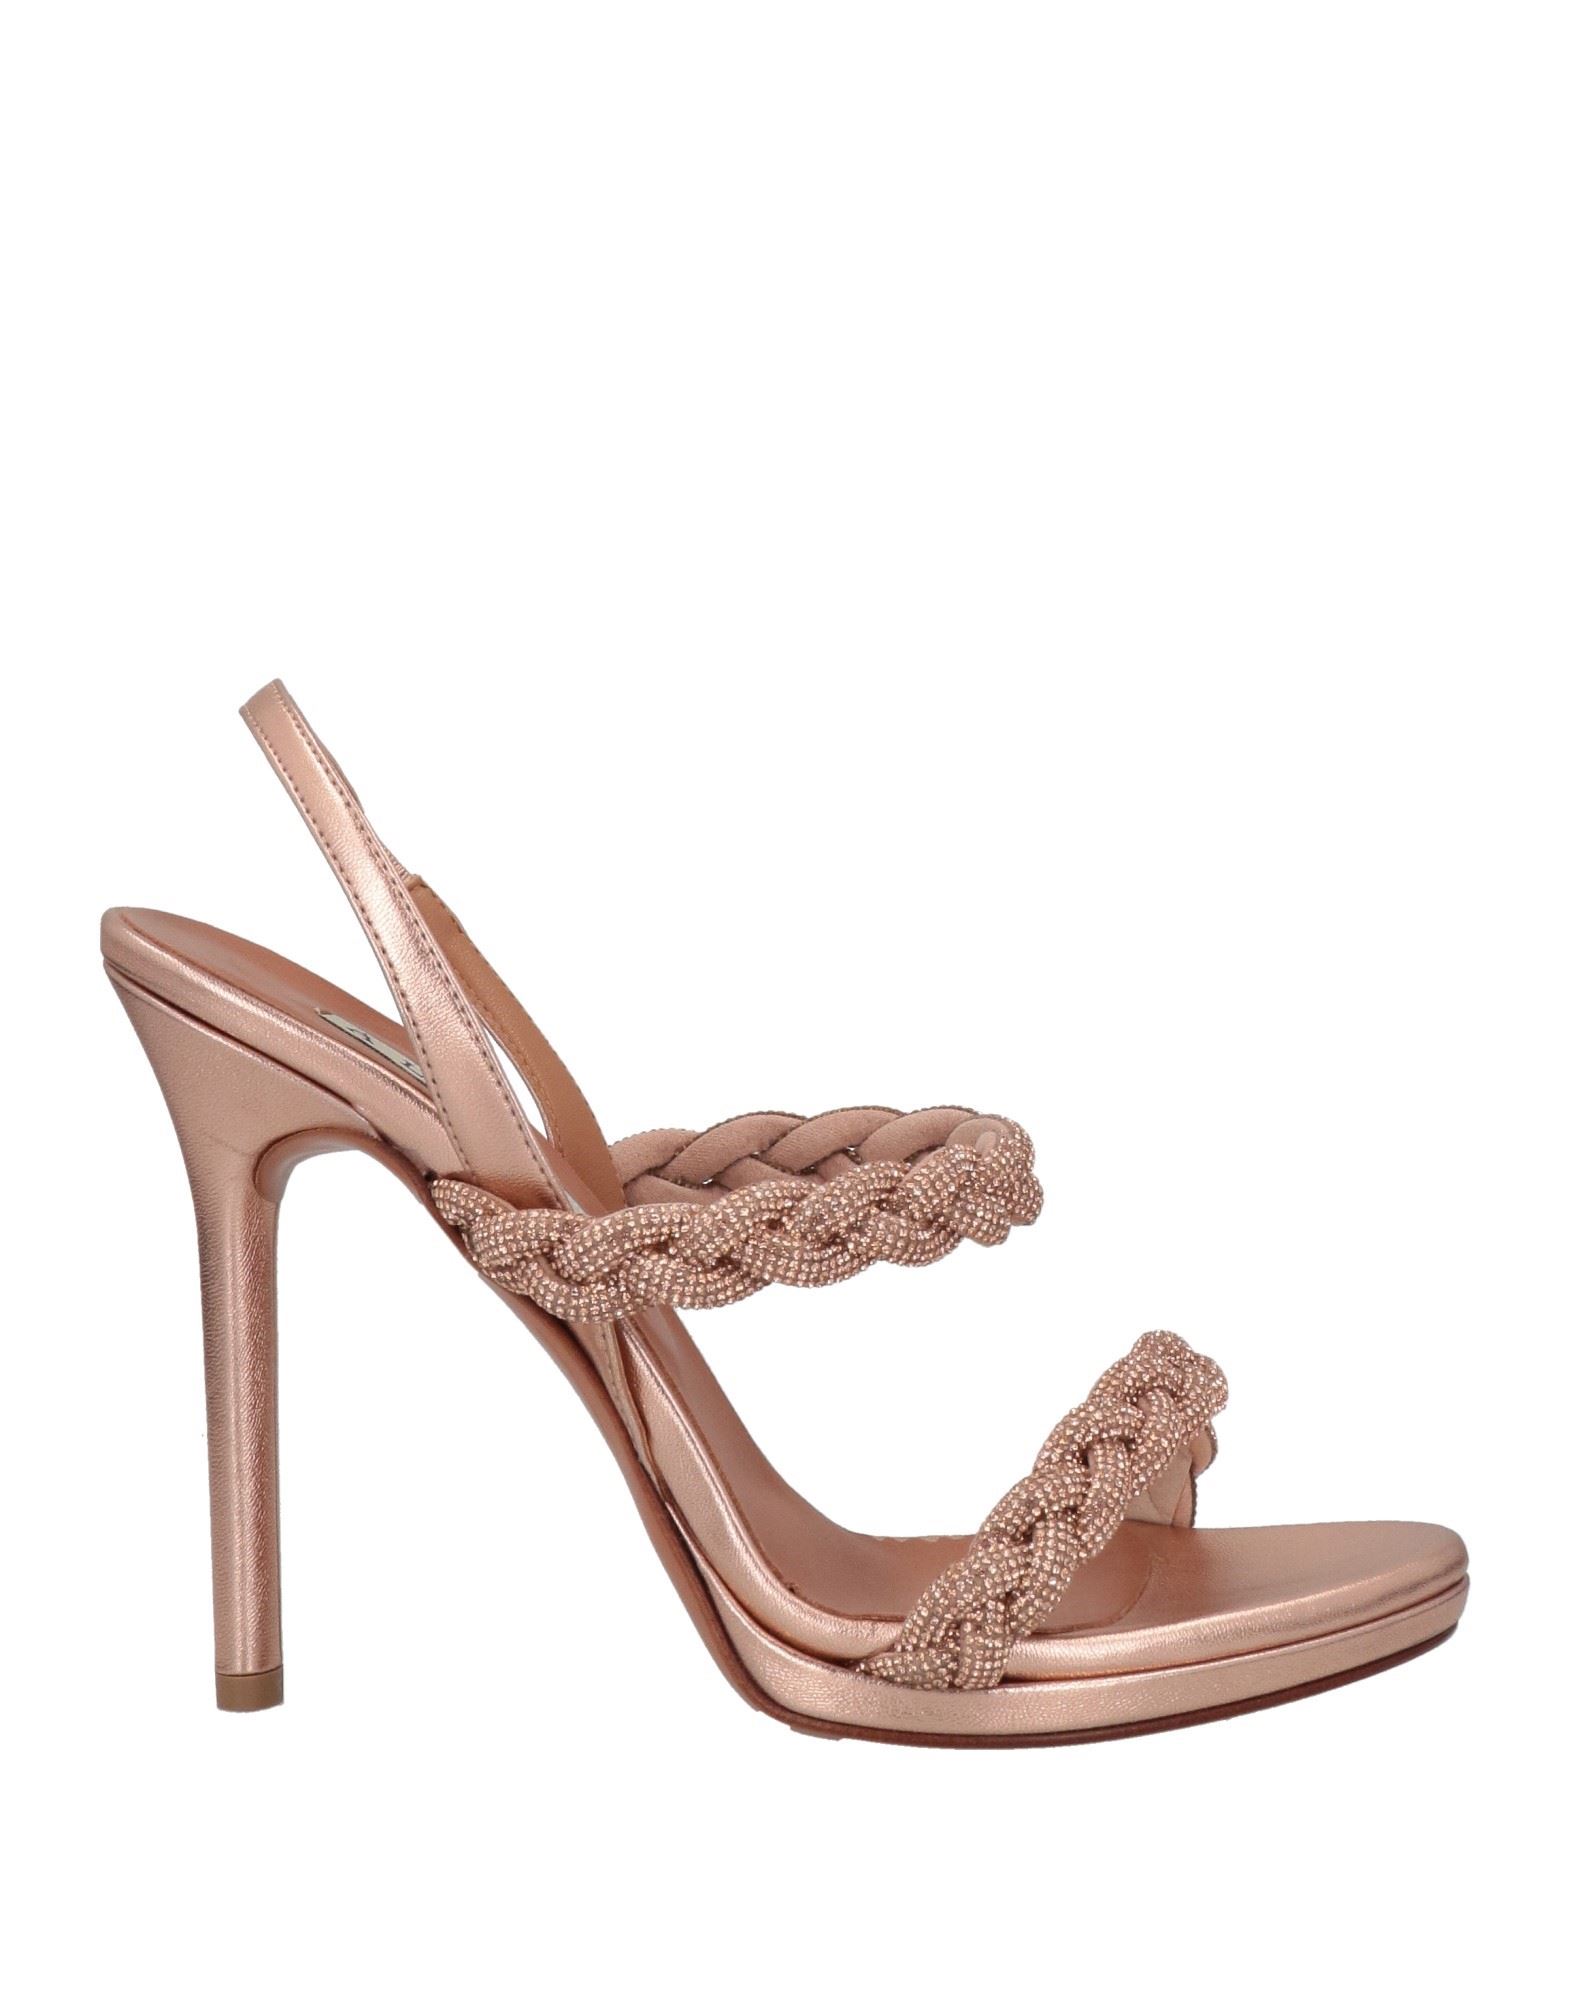 Albano Sandals In Rose Gold